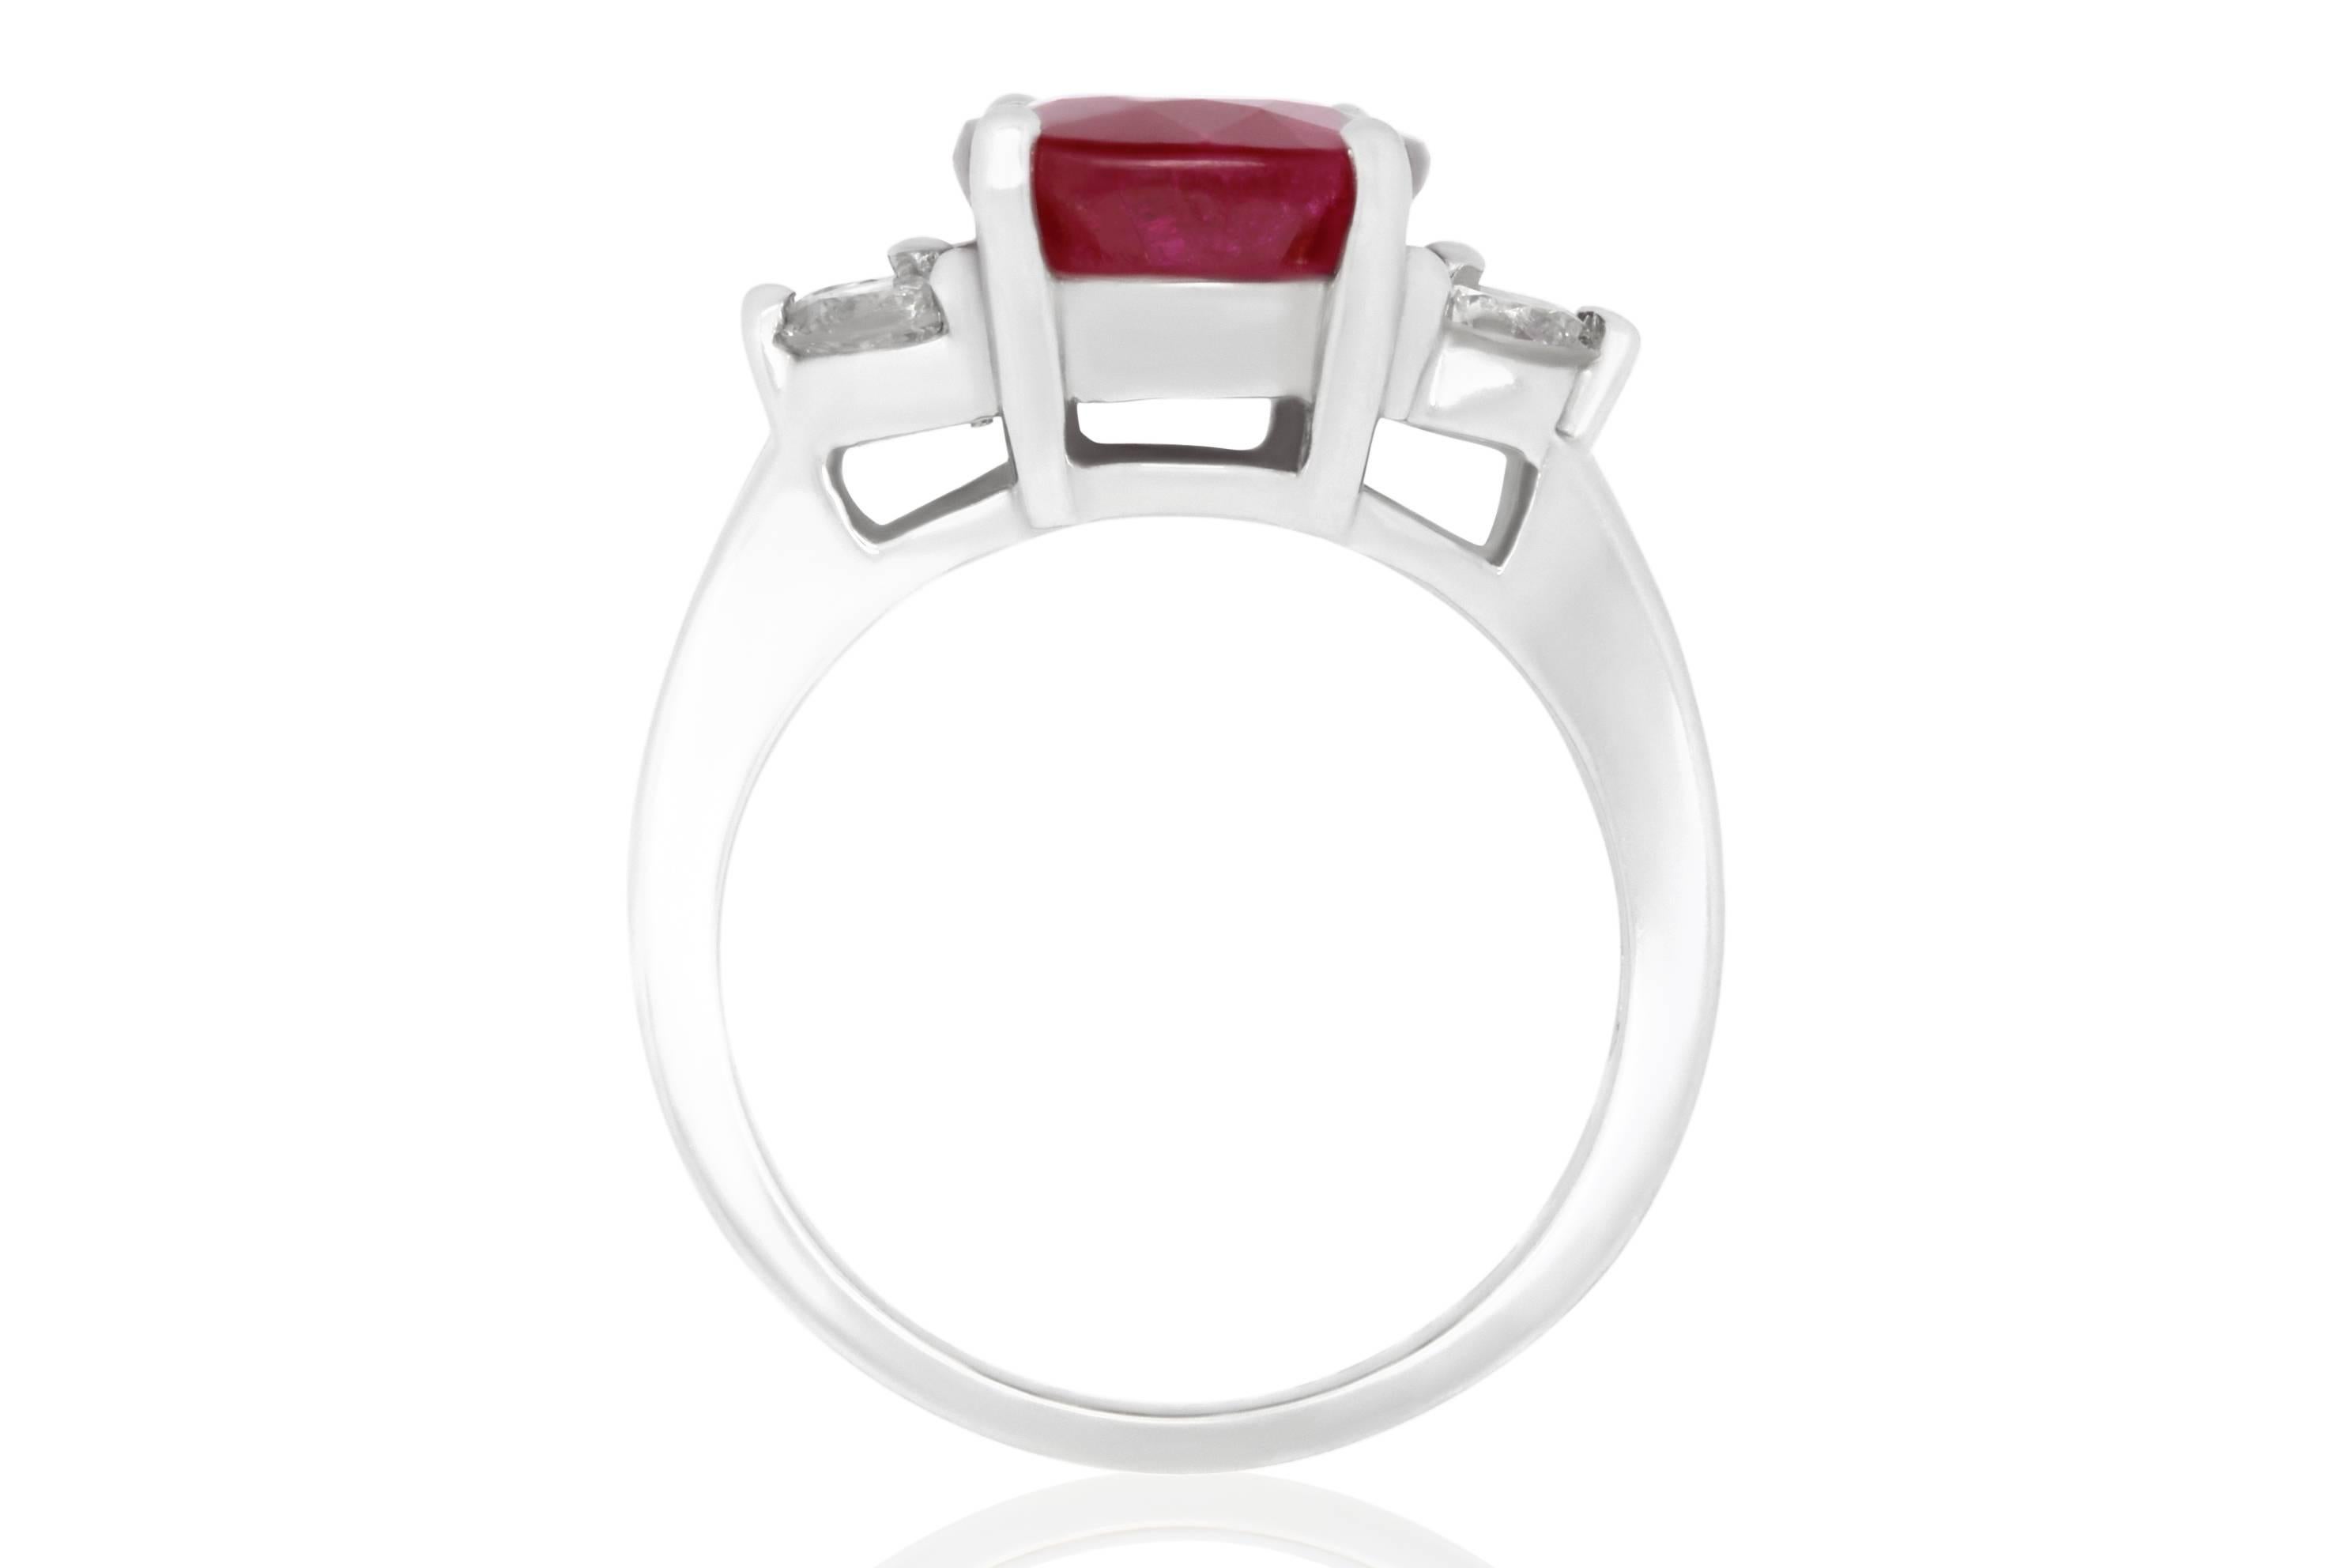 Material: 18k White Gold
Gemstones: 1 Oval Ruby at 5.24 Carats. Measuring 9 x 7 mm.
Diamonds: 4 Brilliant Round White Diamonds at 0.57 Carats. SI Clarity / H-I Color. 
Ring Size: 6.5. Alberto offers complimentary sizing on all rings.

Fine one-of-a